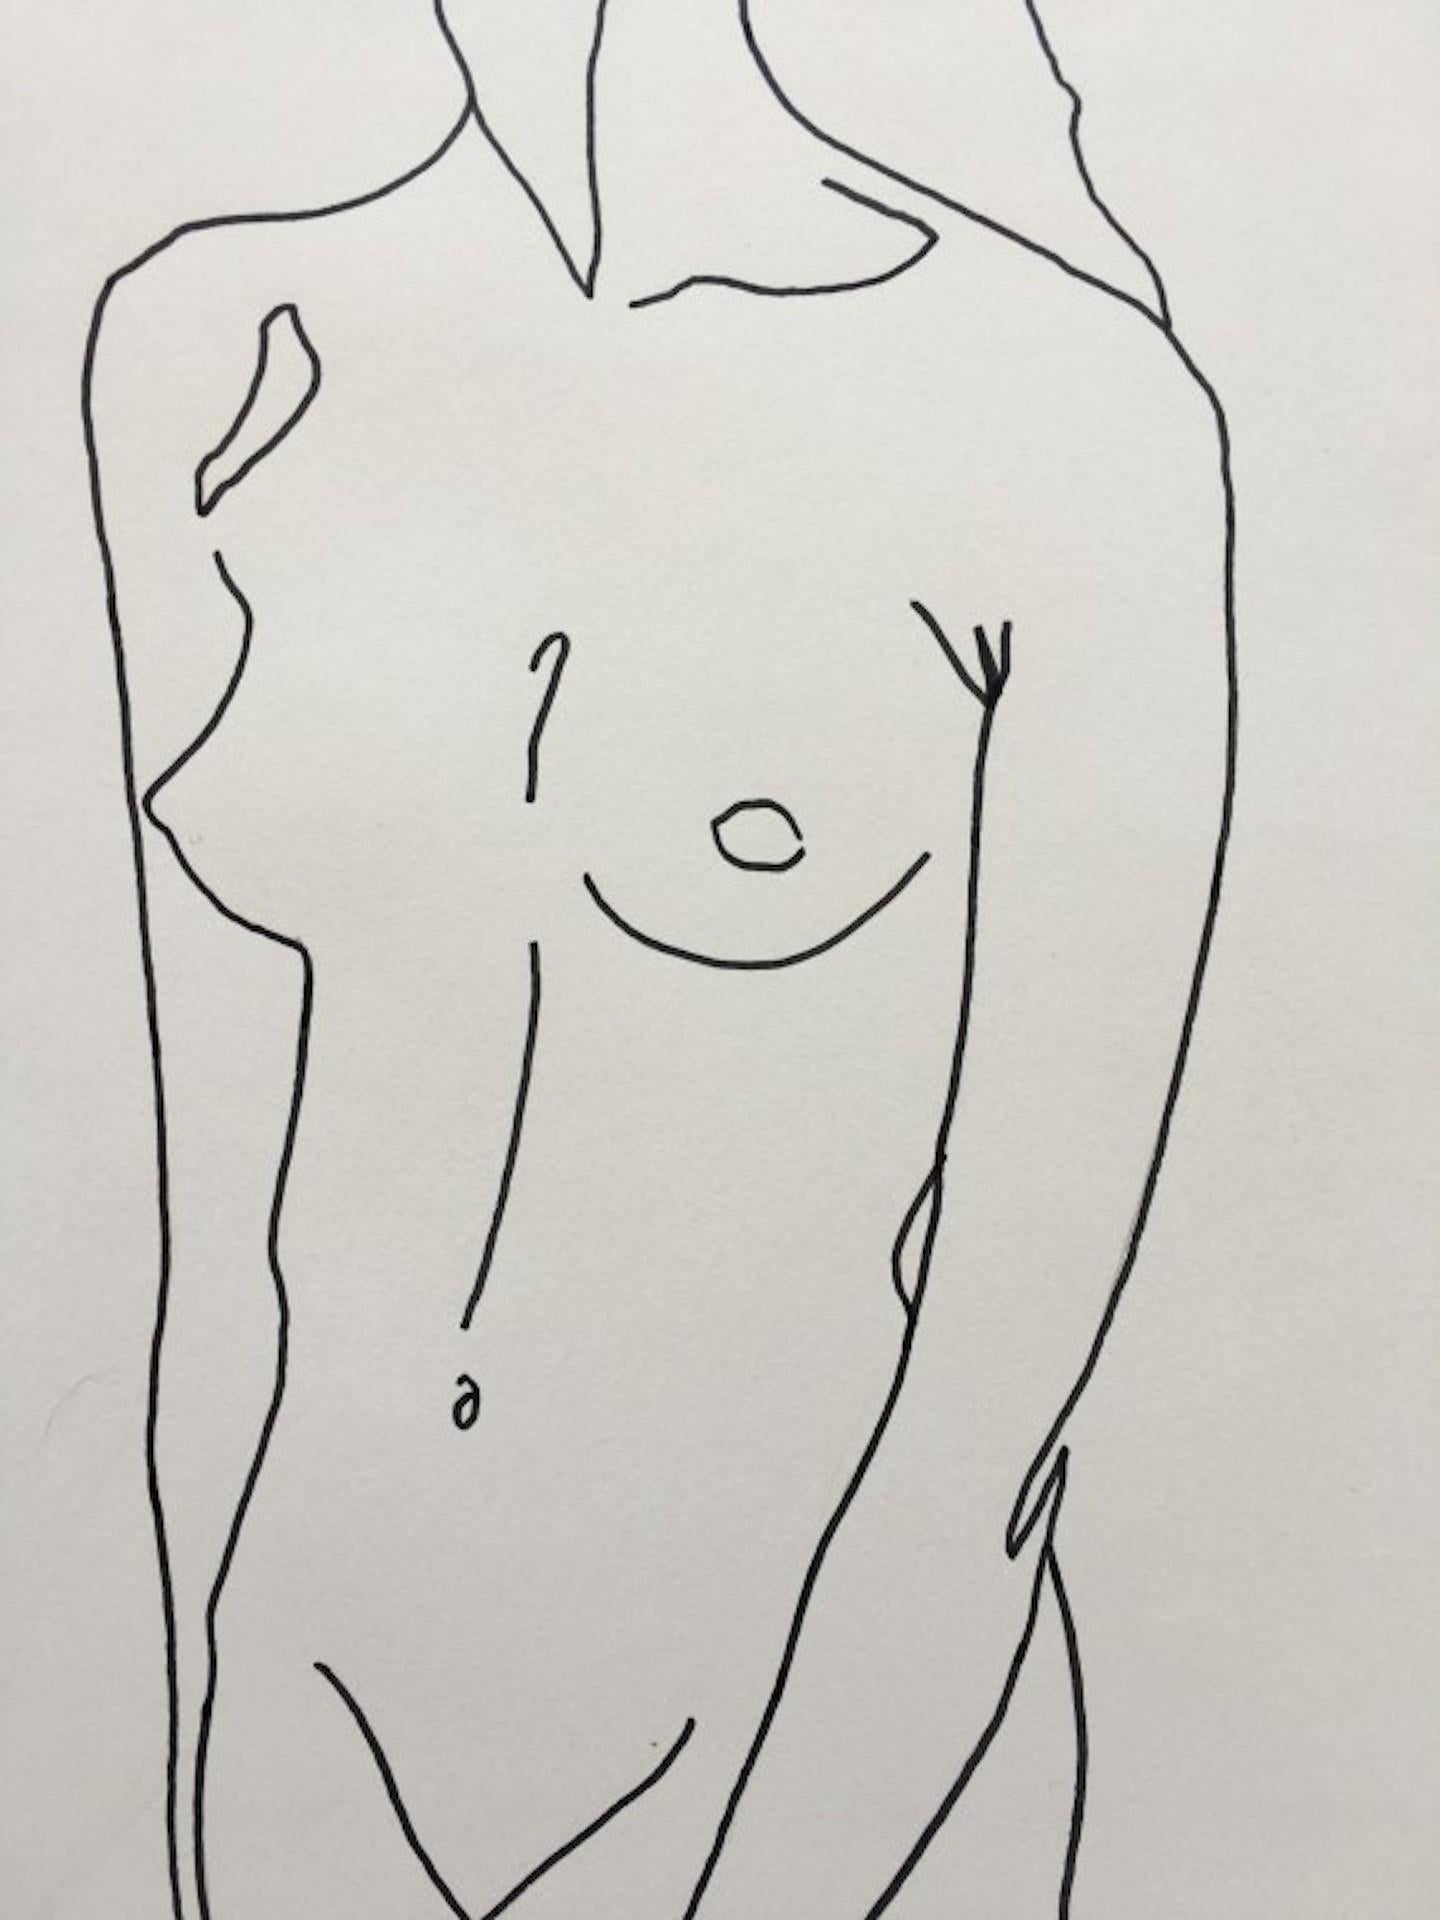 Nude 1 [2021]
Original
Nudes and Erotic
Black Ink Pen on Cartridge Paper
Complete Size of Unframed Work: H:42 cm x W:29 cm x D:0.01cm
Sold Unframed
Please note that insitu images are purely an indication of how a piece may look

This drawing is one